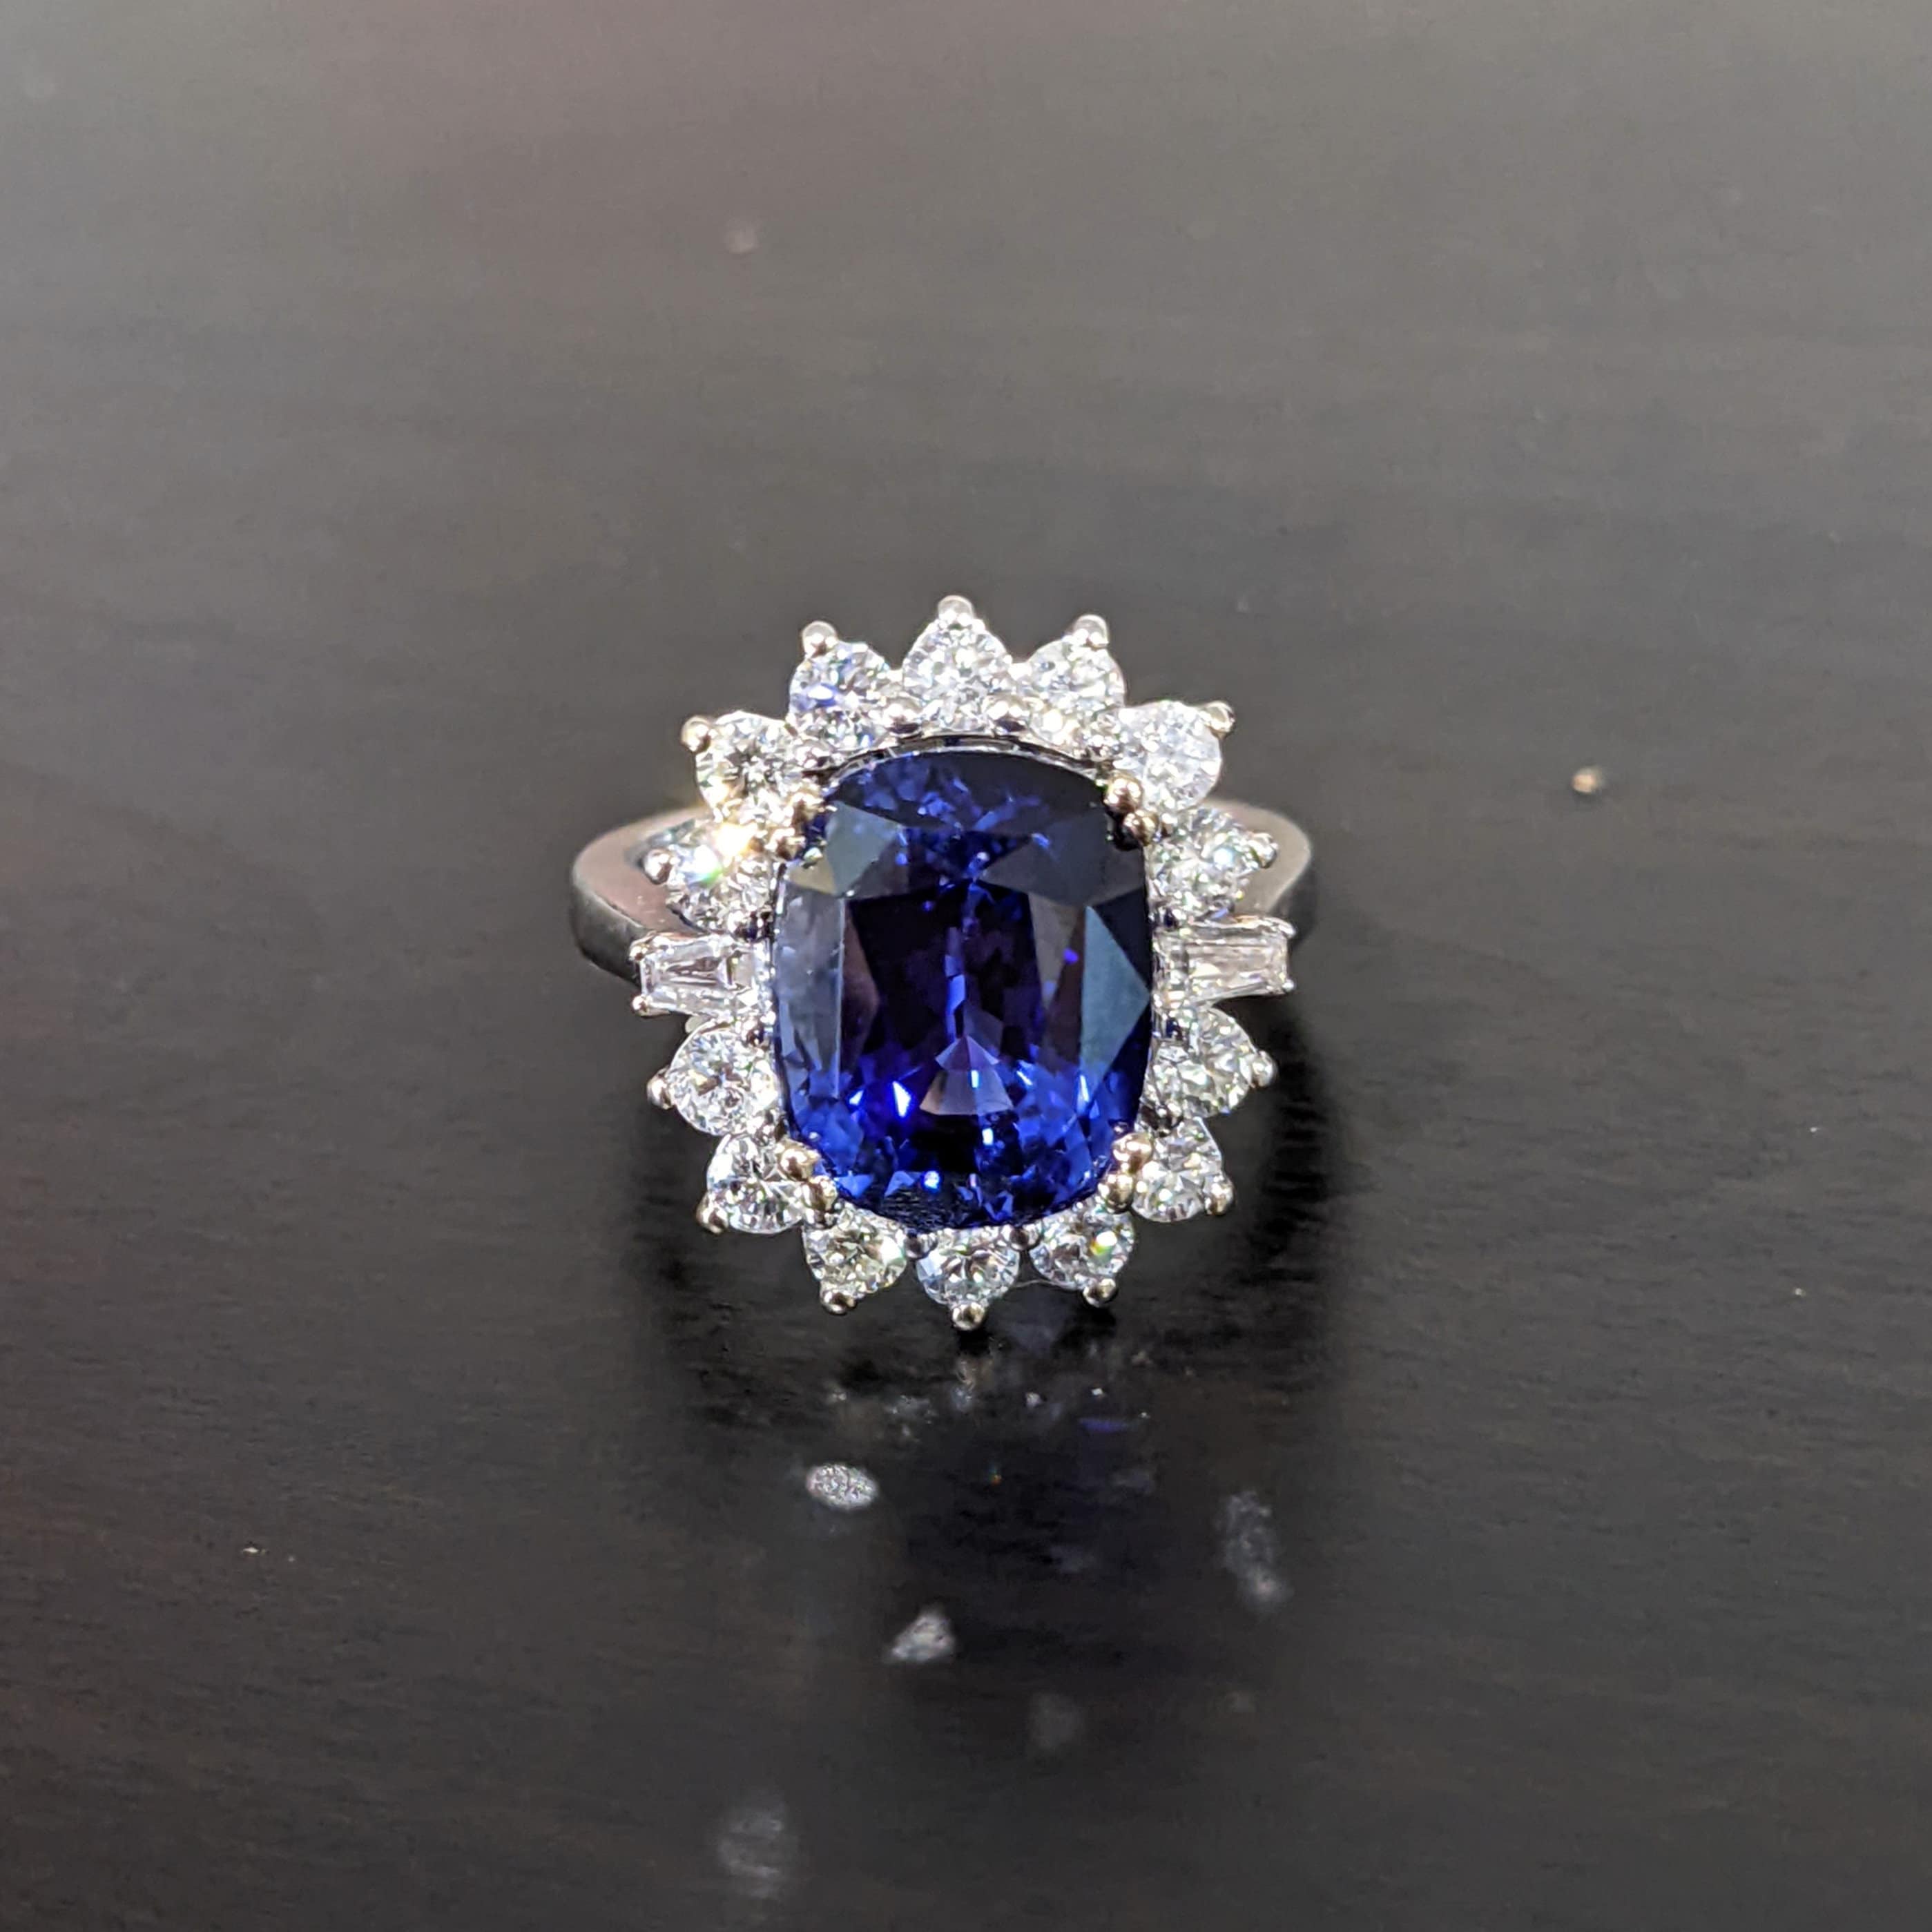 Stunning Ceylon Sapphire Ring w a Natural Diamond Halo in Solid 18k White Gold | Cushion 12x10mm | 9 carat Sapphire | Engagement Ring